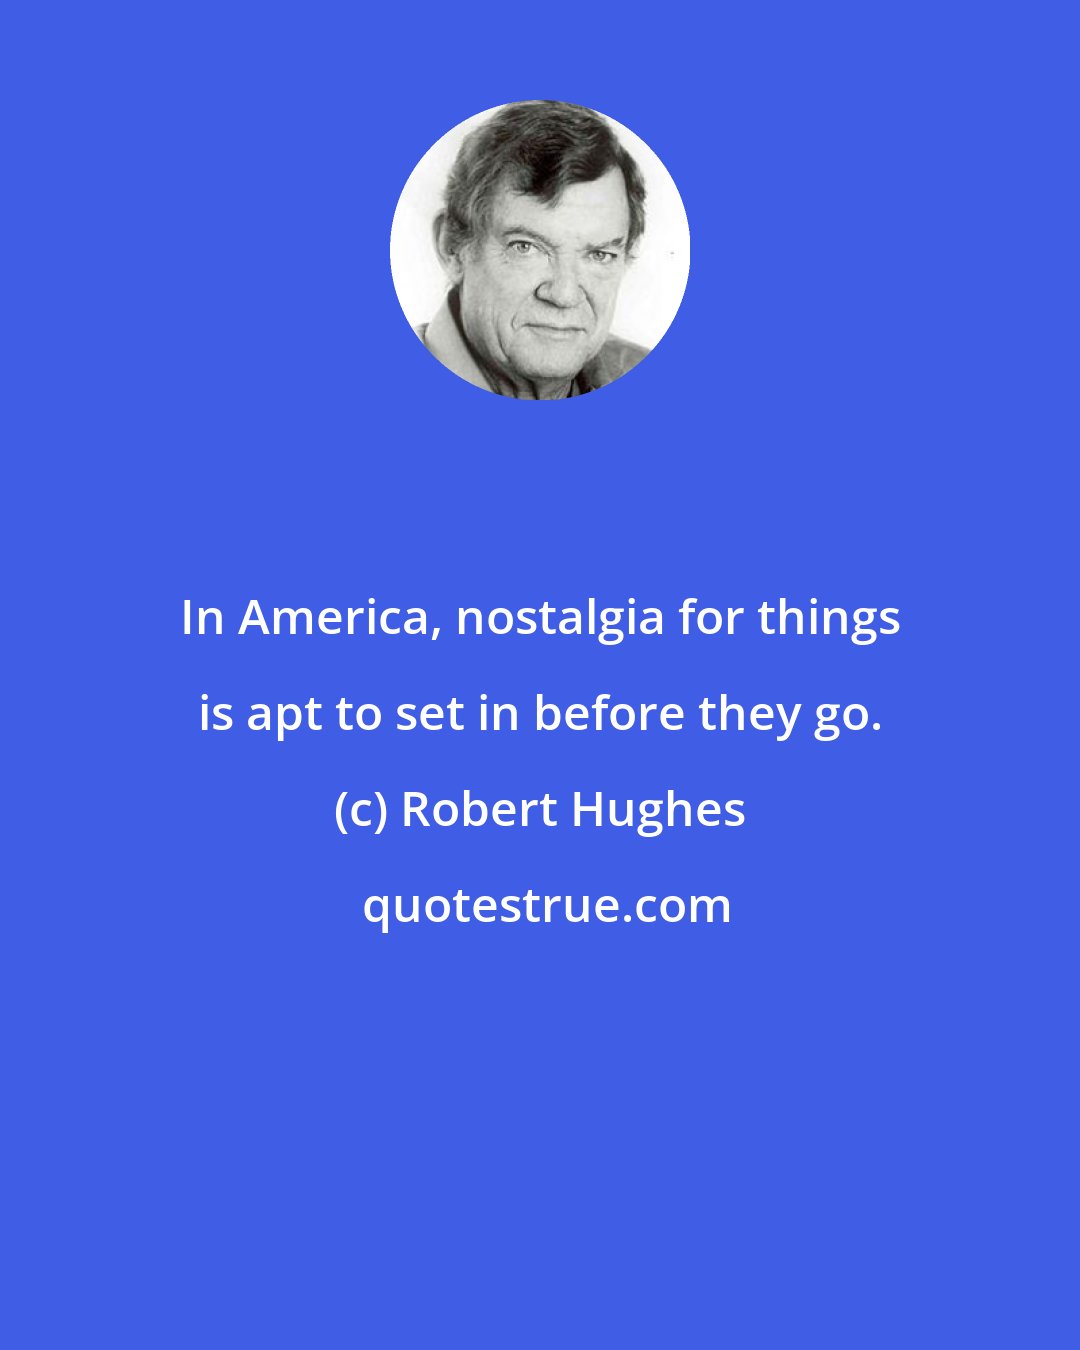 Robert Hughes: In America, nostalgia for things is apt to set in before they go.